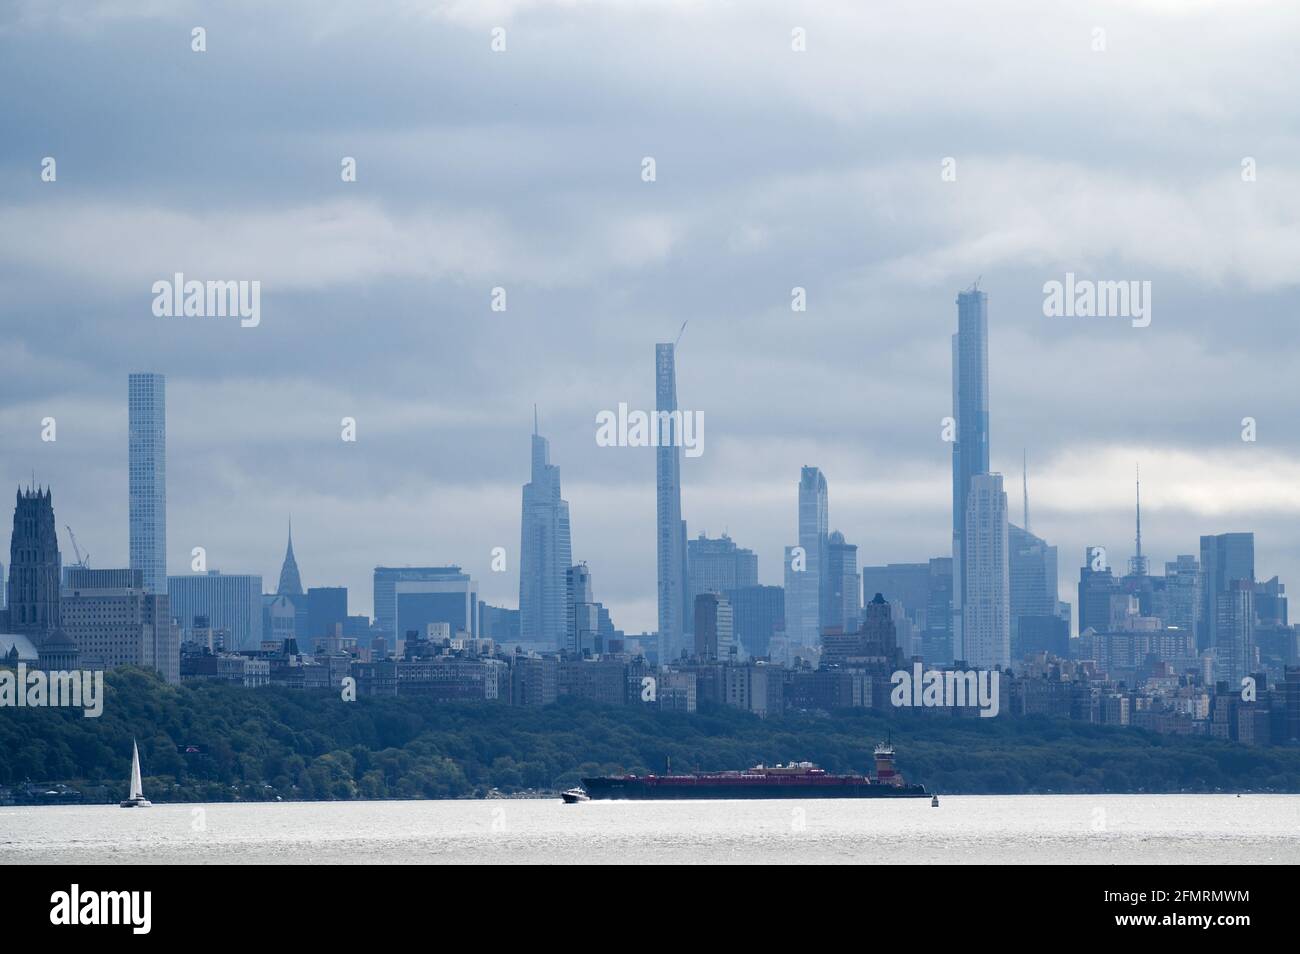 Uptown and Midtown Manhattan on an overcast day Stock Photo